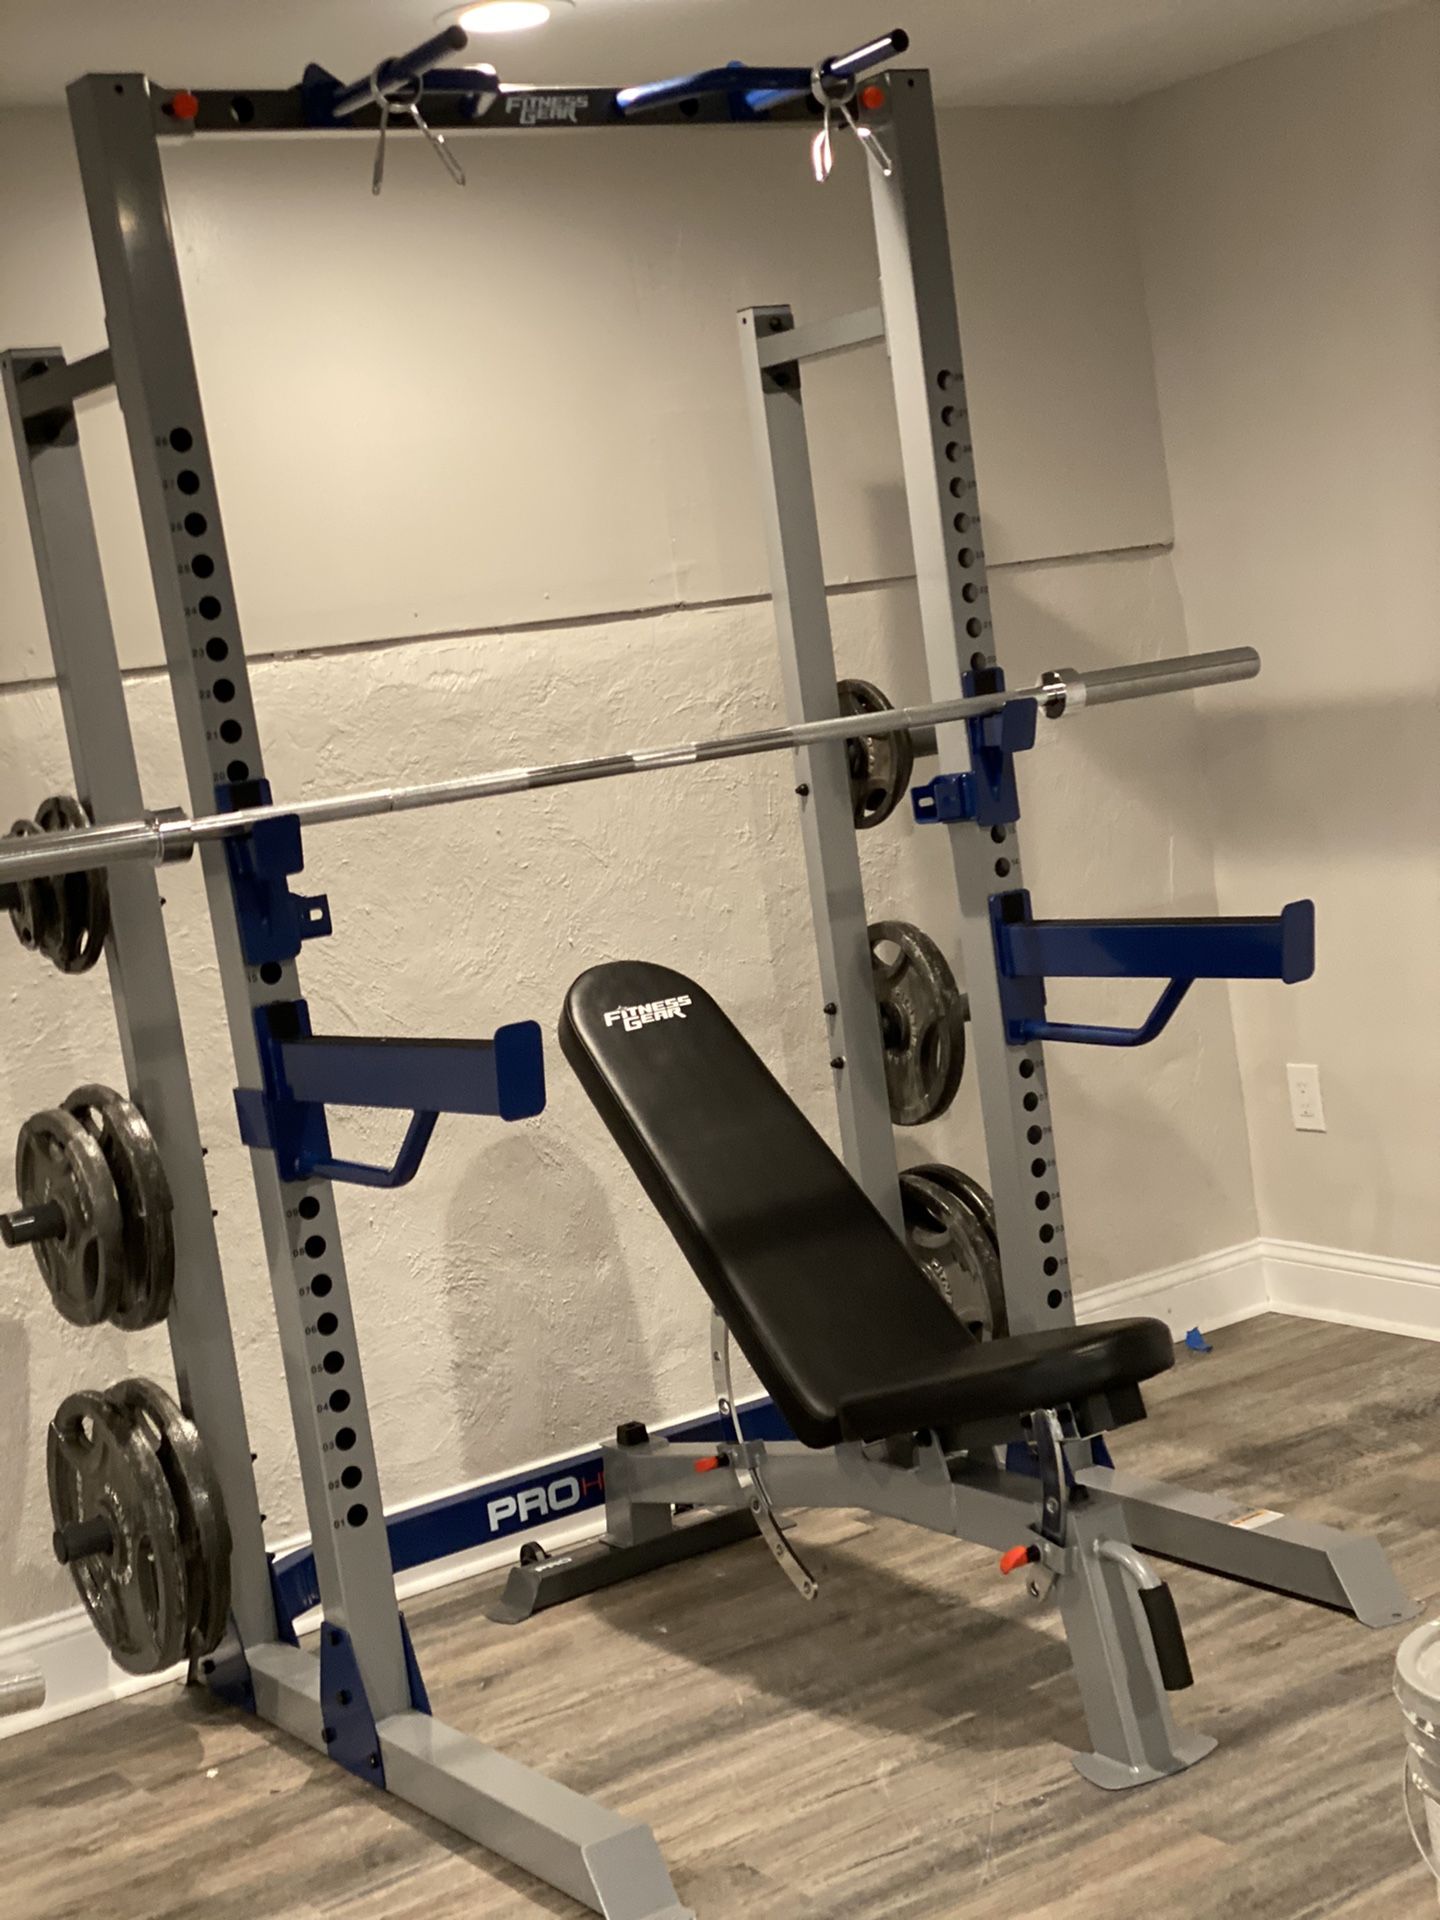 Home Gym Total Package Half Rack, Bench, weights, barbell, EZ curl